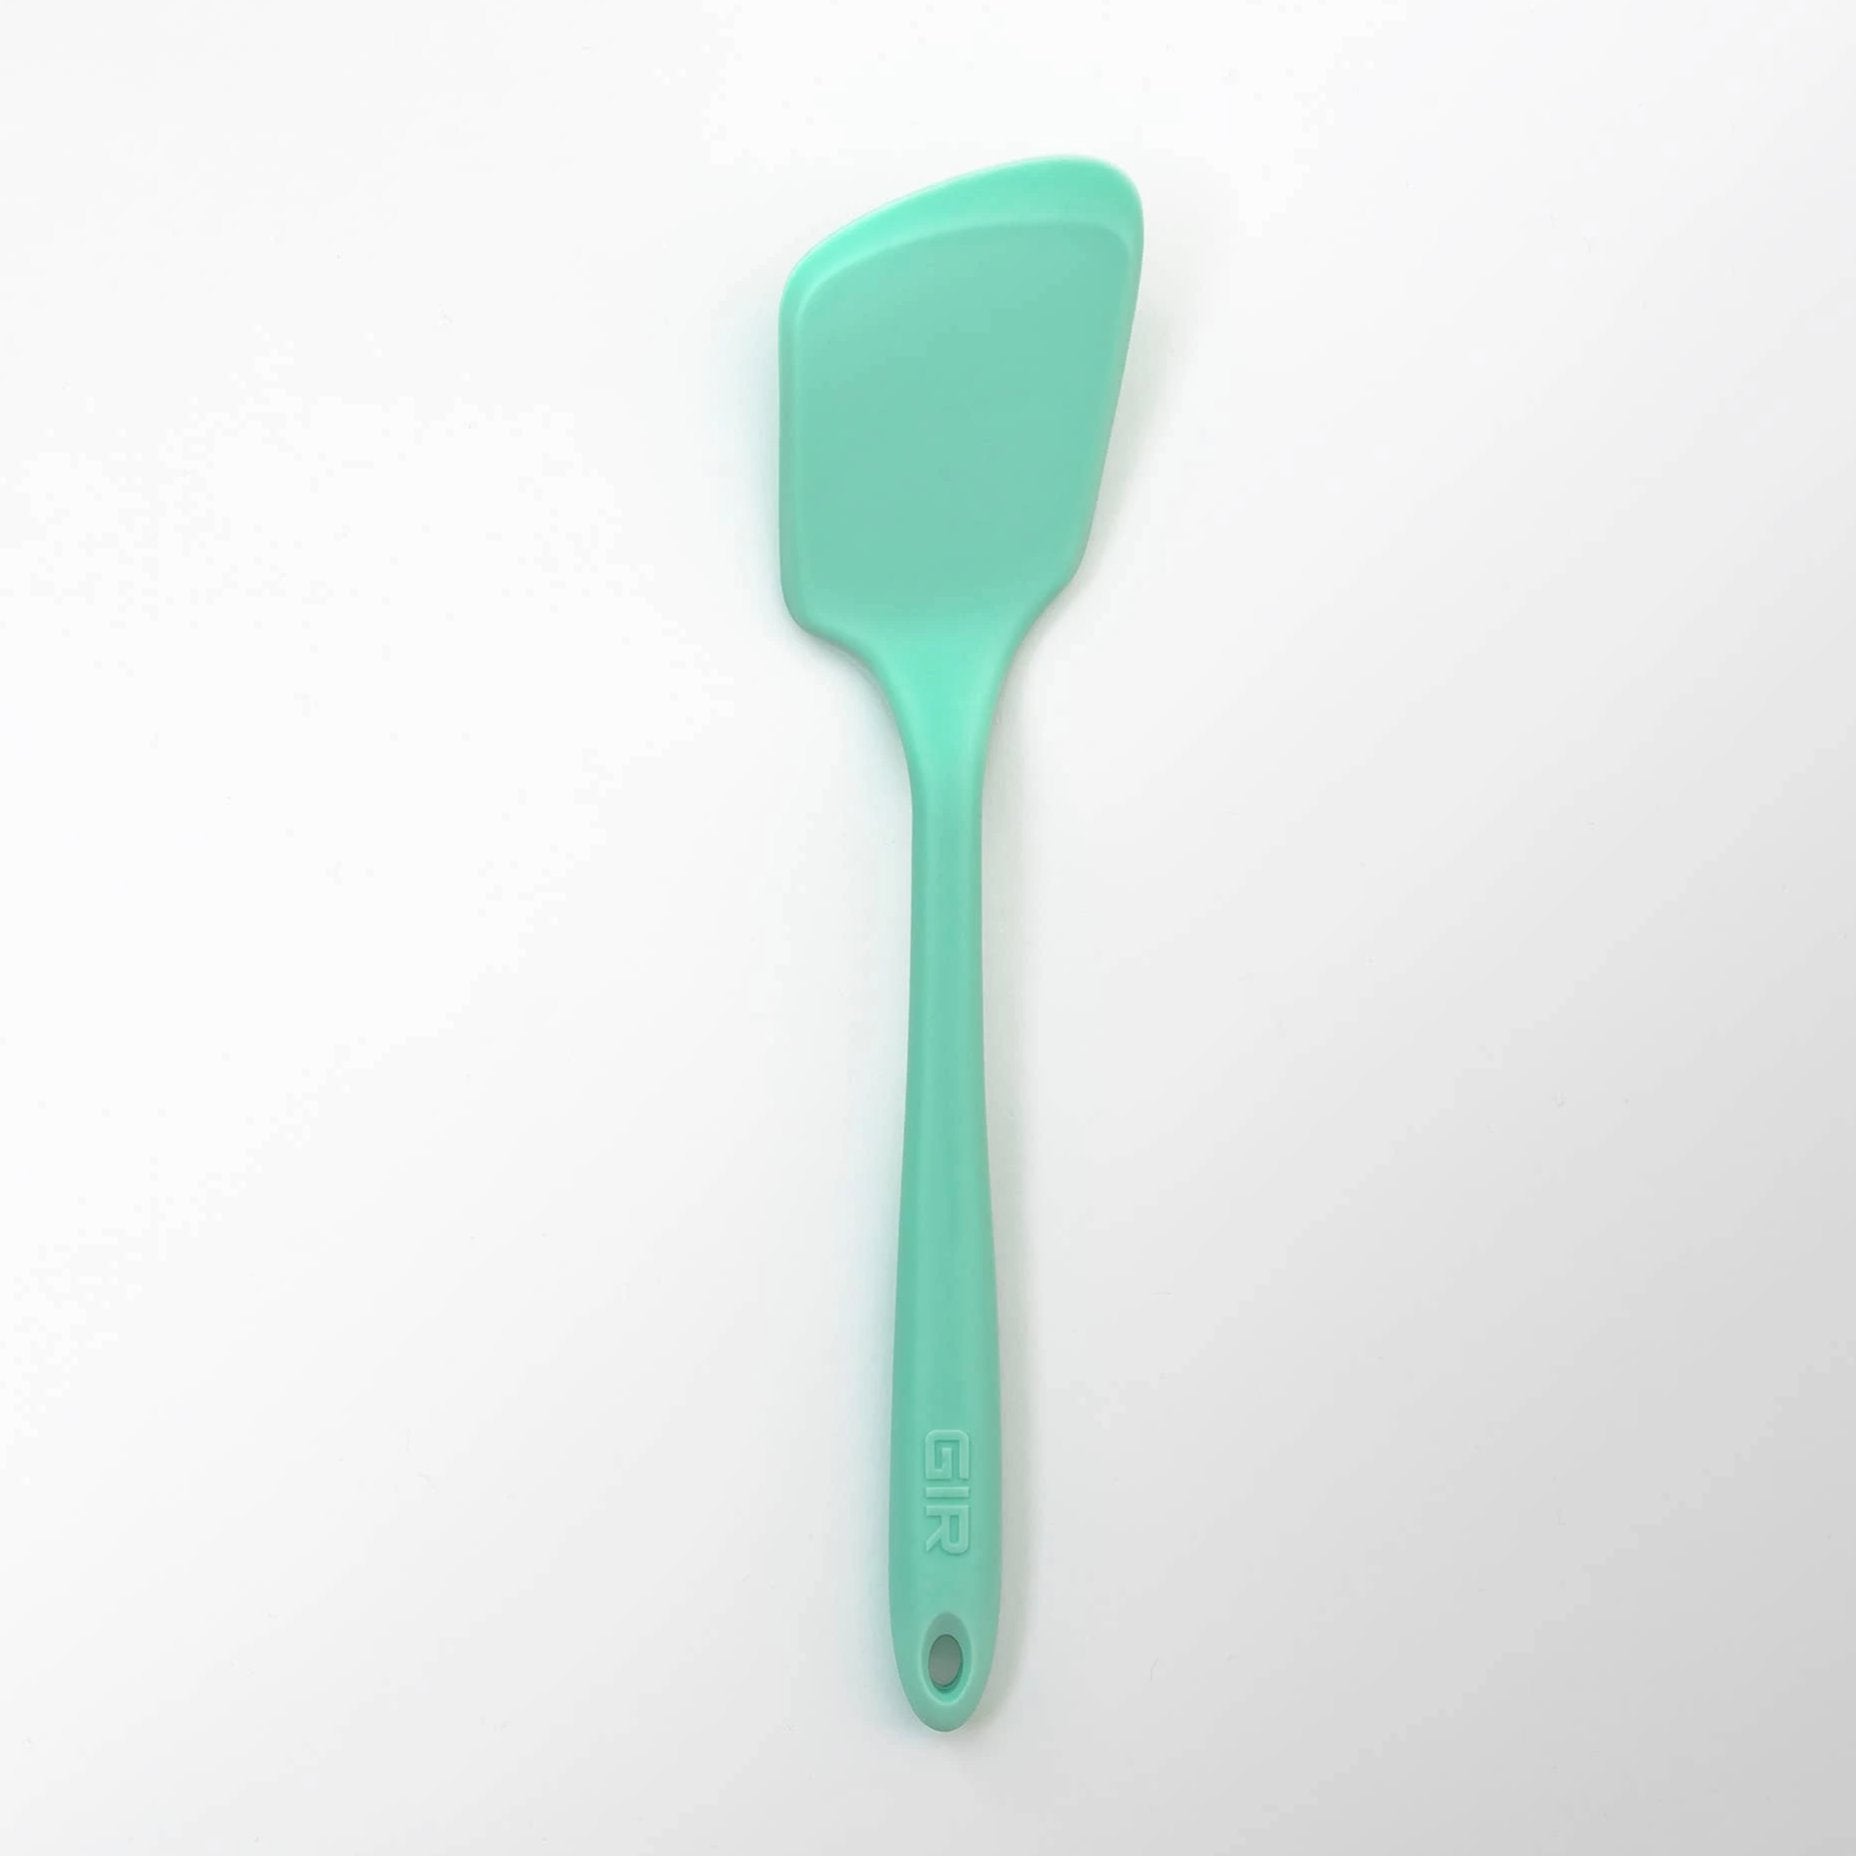 This $8 GIR Mini Spatula Is My Kitchen Game Changer